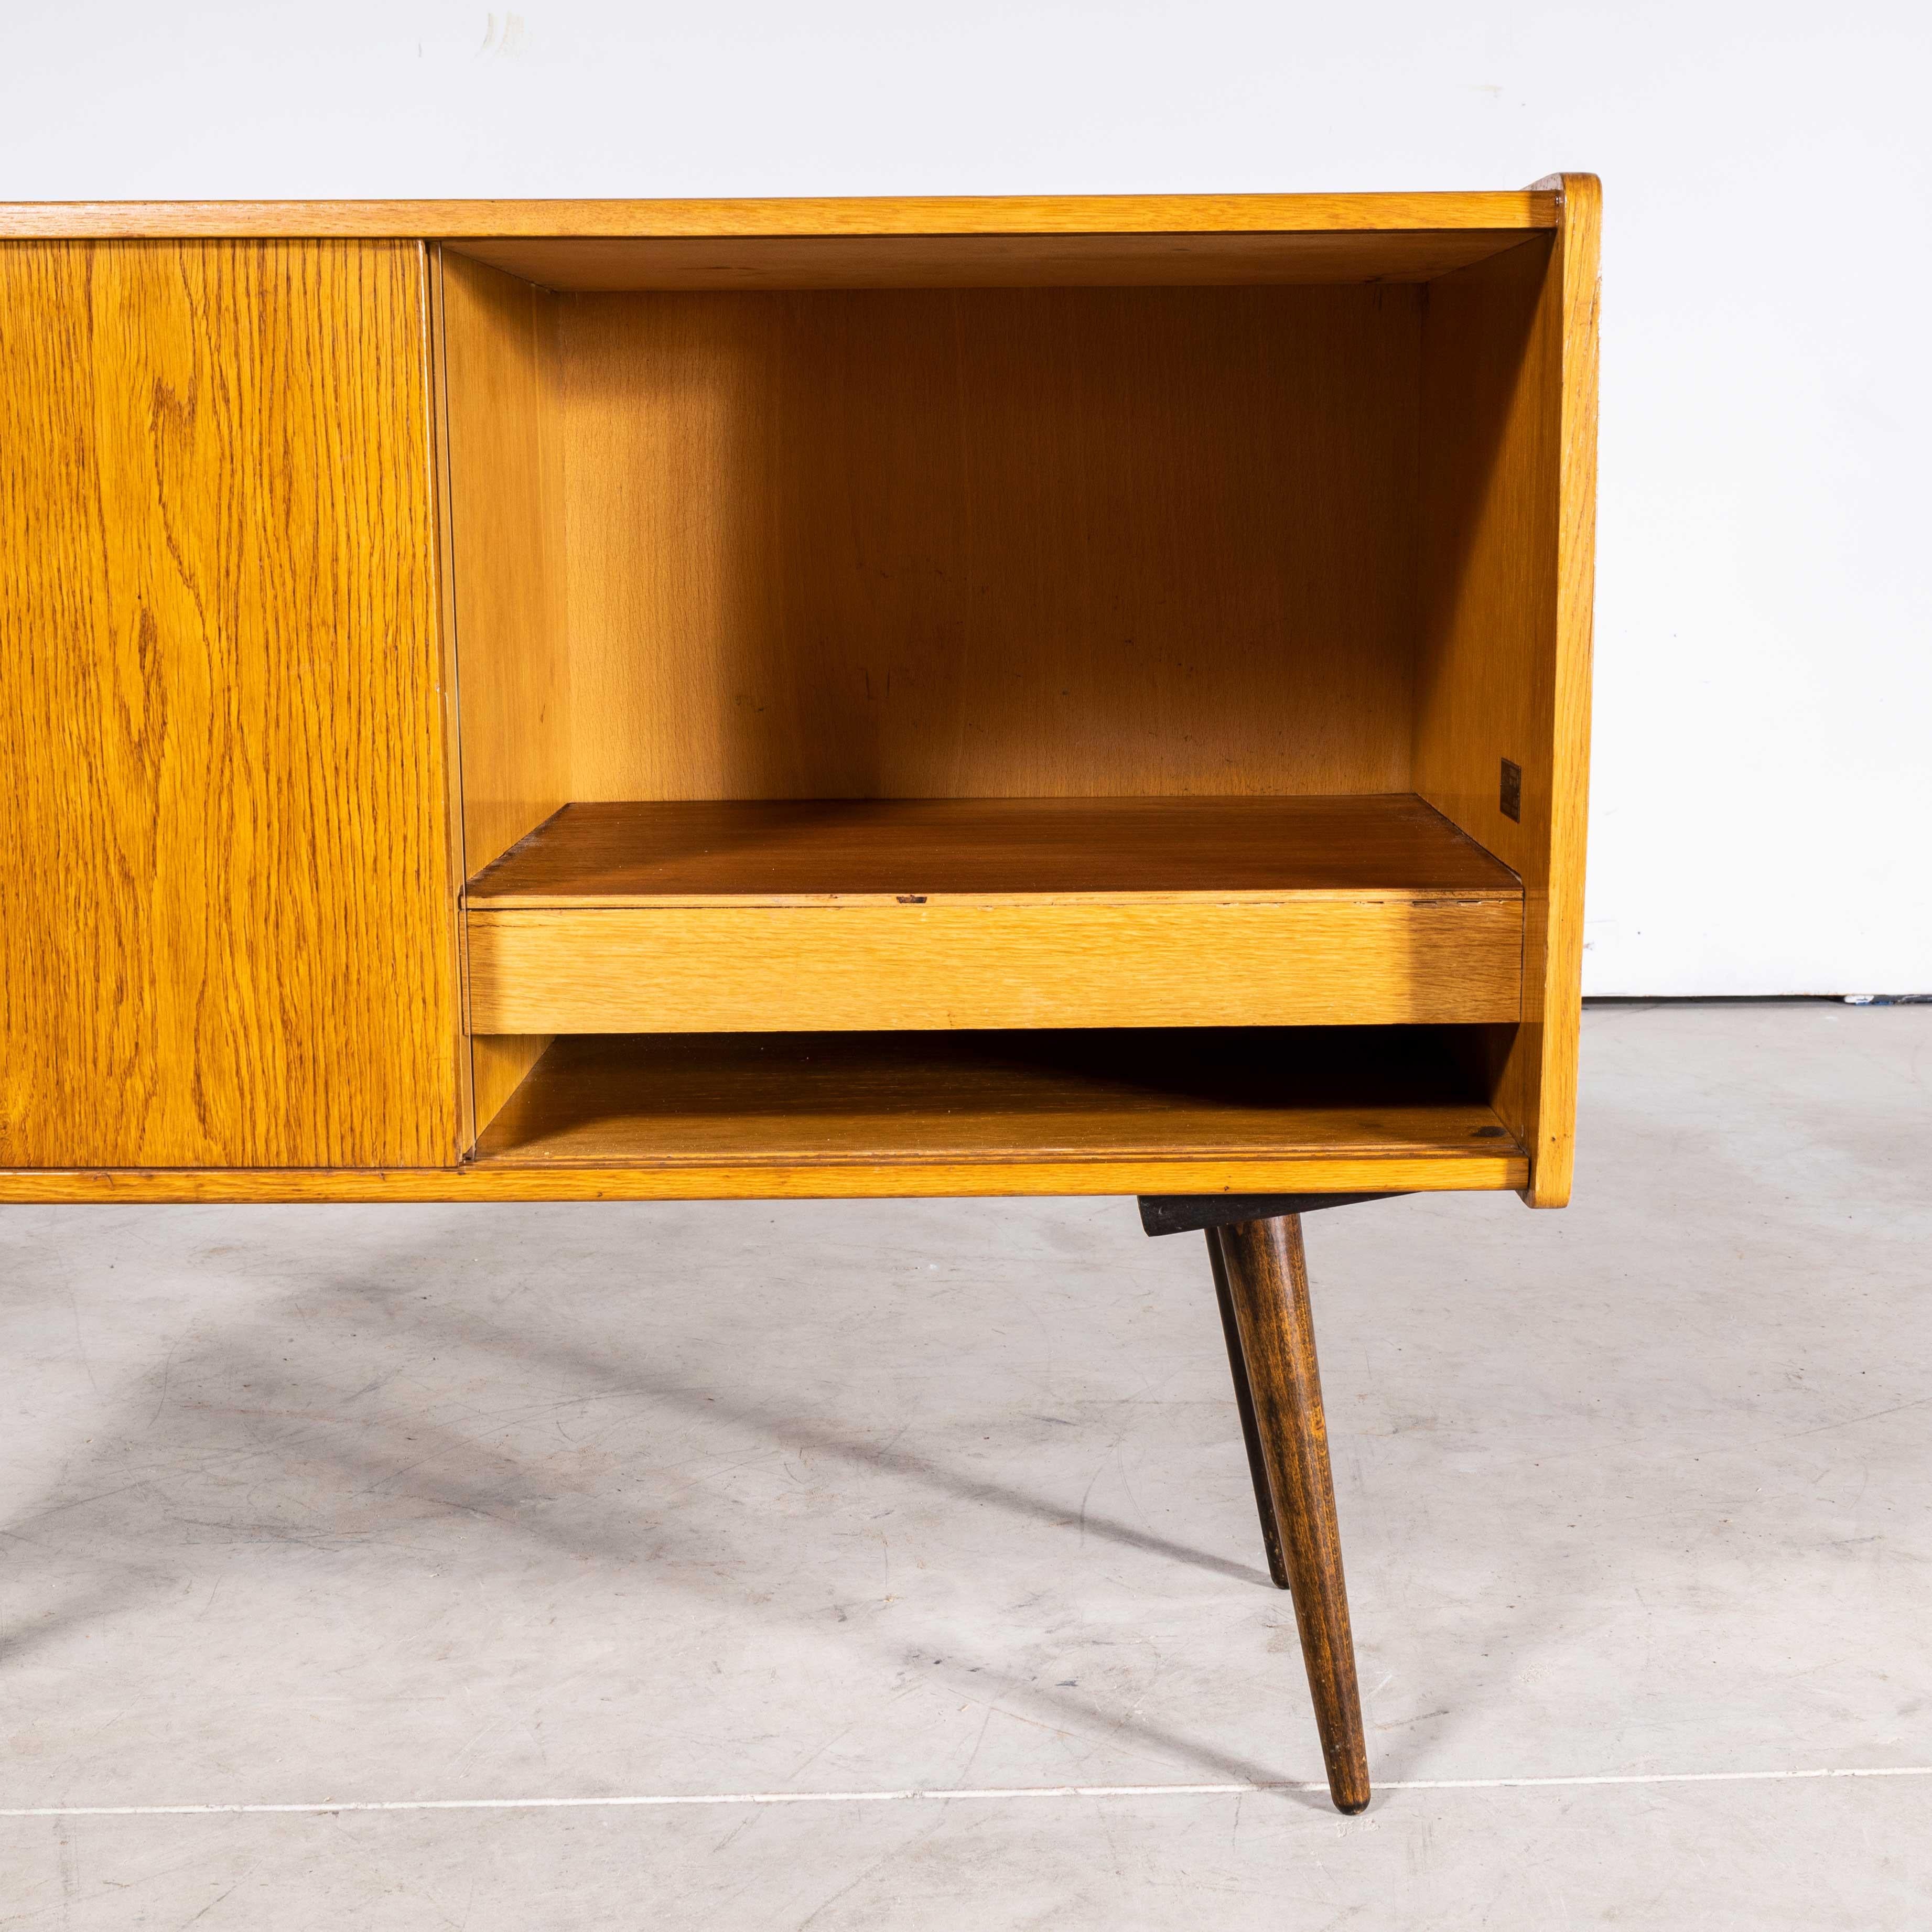 1950s Compact Sideboard – Original Media Unit – Nabytek Czech
1950s Compact Sideboard – Original Media Unit – Nabytek Czech. Beautiful simple and Classic midcentury small sideboard – media unit sourced in the Czech Republic. Produced by Nabytek in